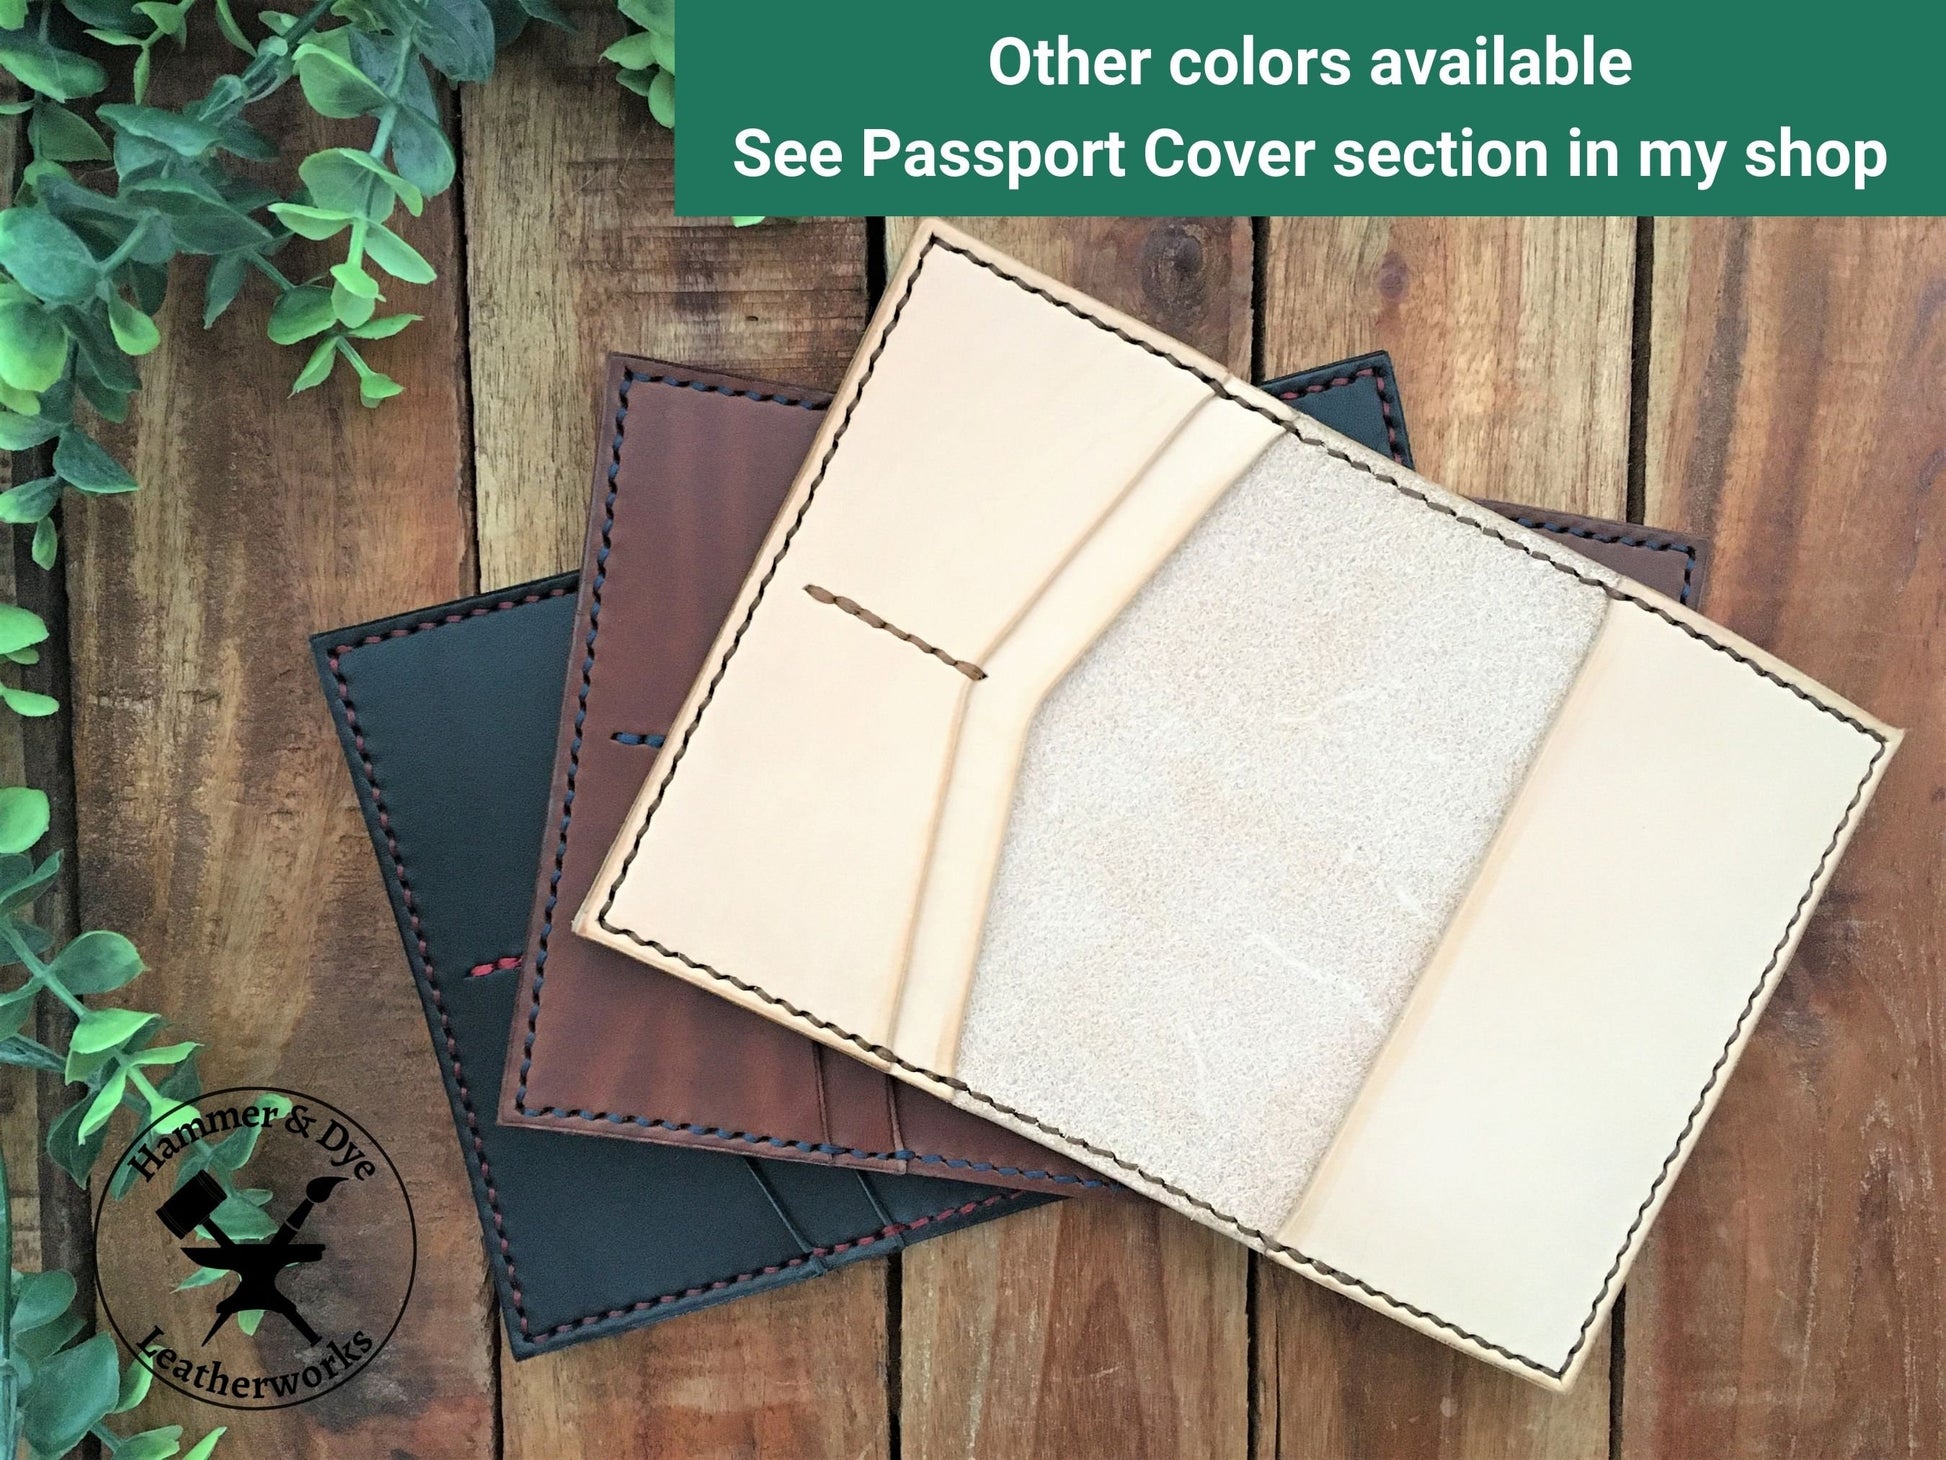 Handmade Leather Passport Covers available in several colors